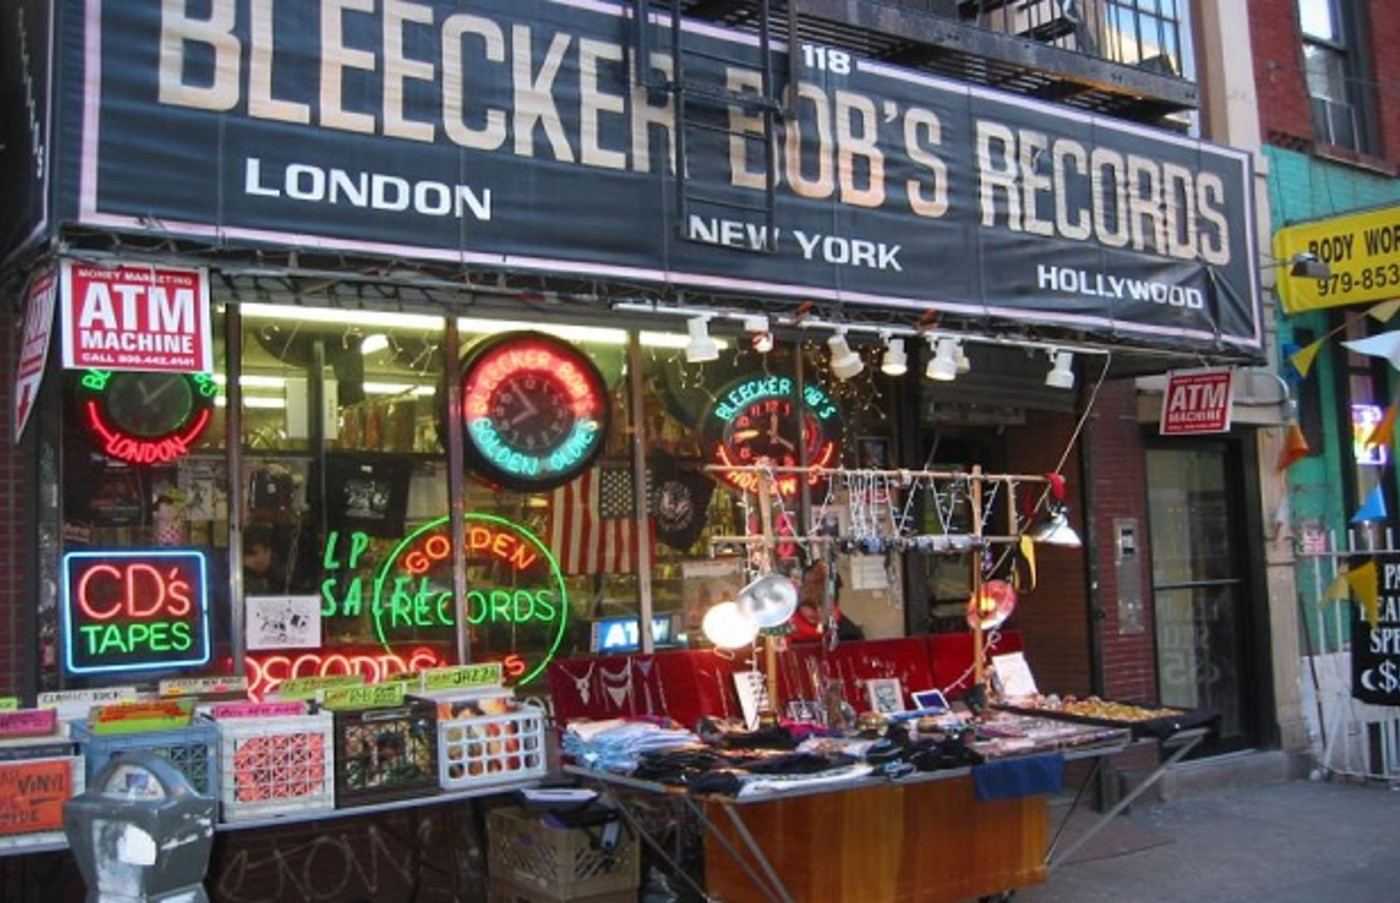 The Original Awning for Bleecker Bob's Records Is For Sale ...